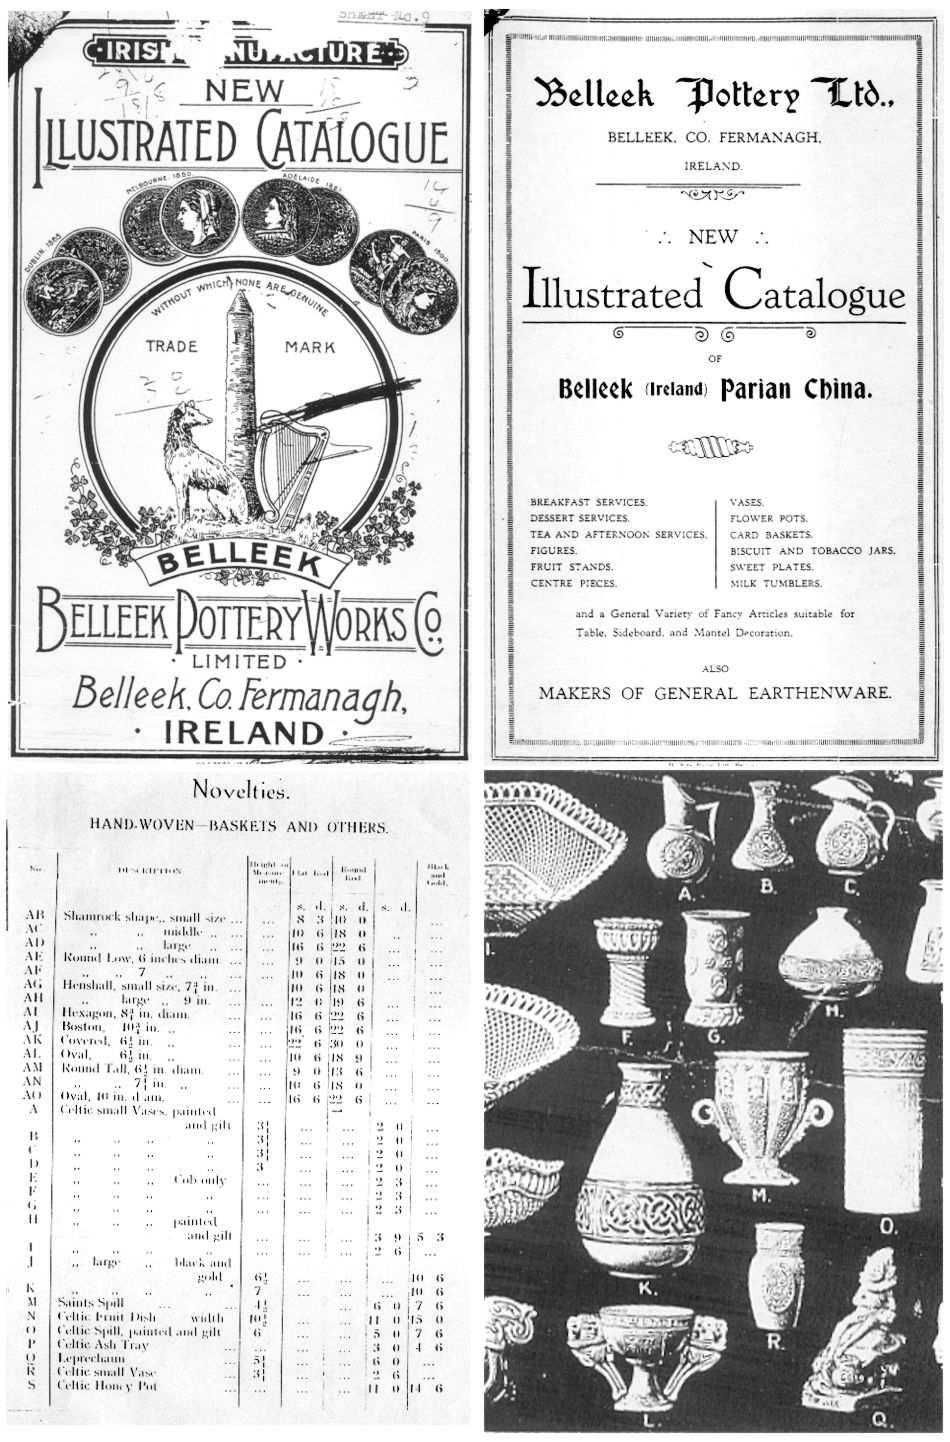 Sheet 4 Belleek IRELAND Mark: Summary a) Since the Wishing Cup piece could not have been produced prior to 1923 (ref.